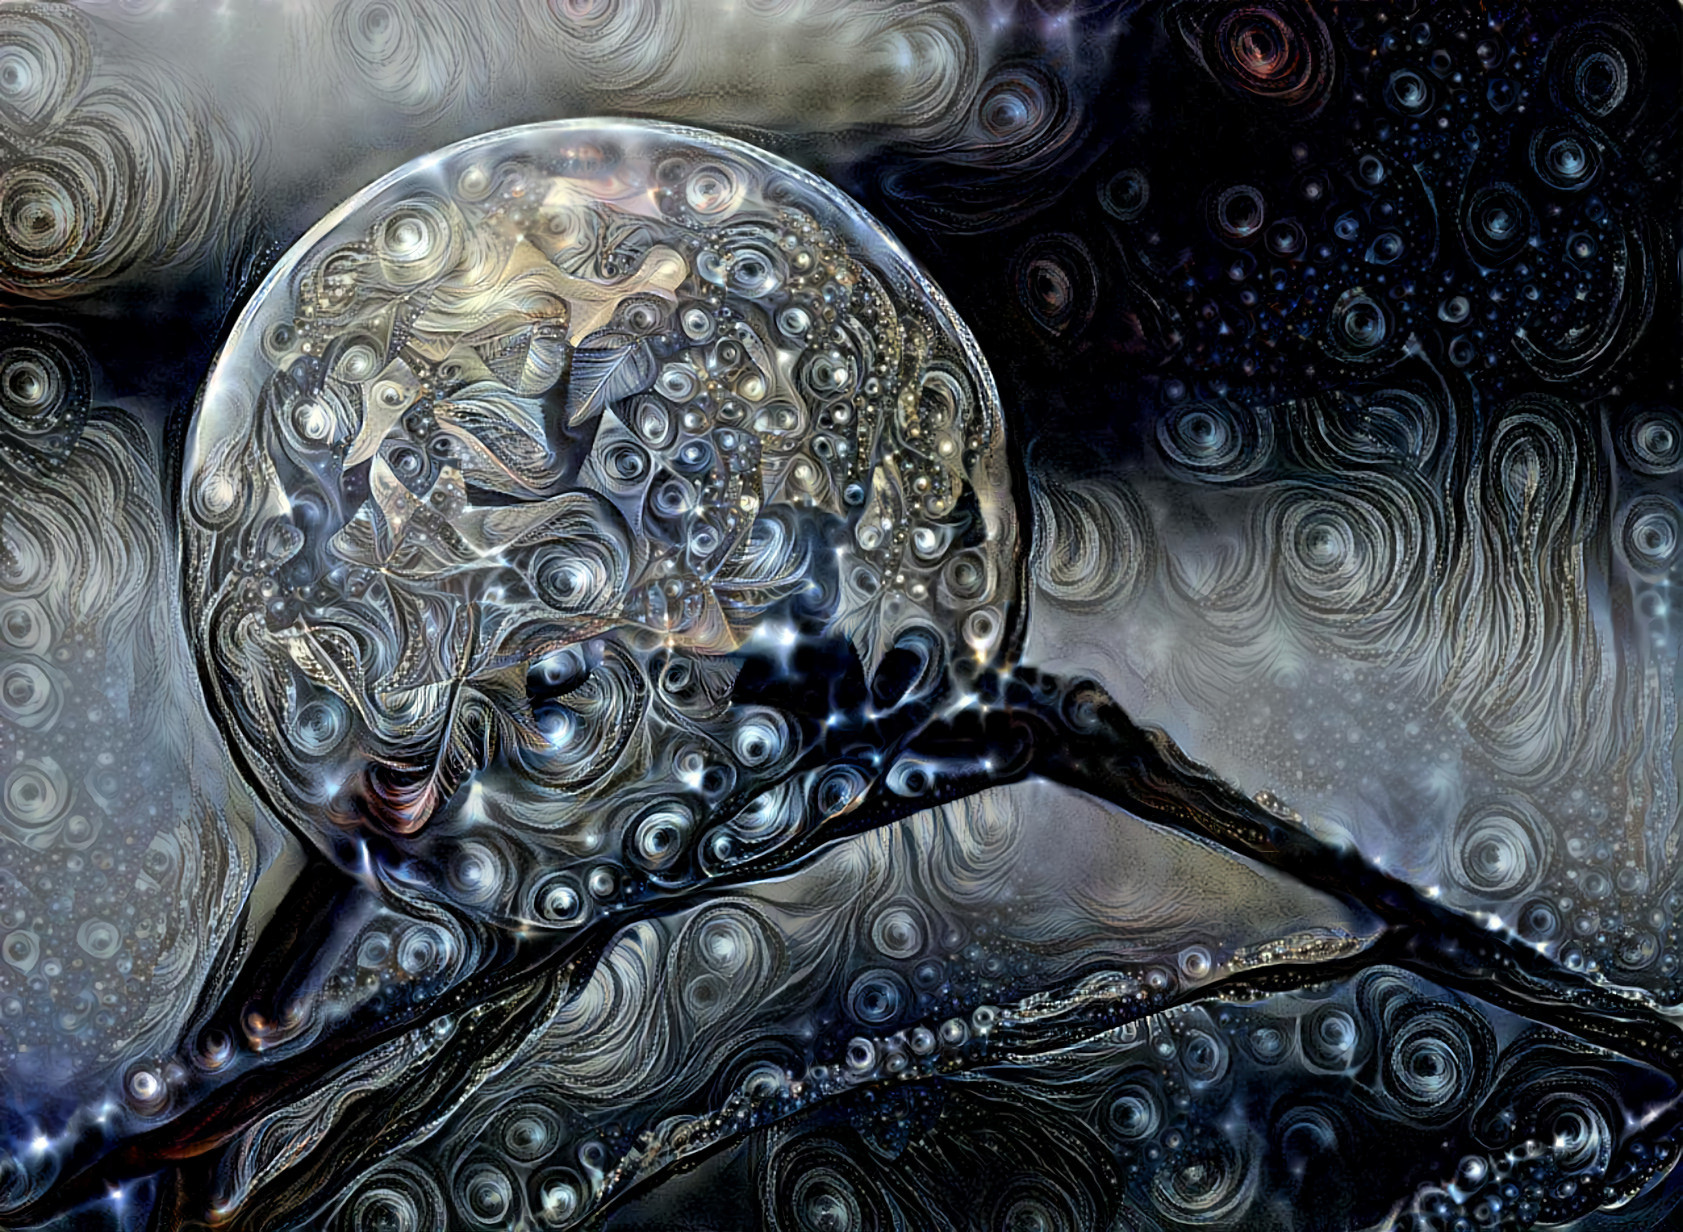 Ice Crystal Ball (made with a soap bubble and well below freezing temperature). Original ice art and photo by Aaron Burden on Unsplash.